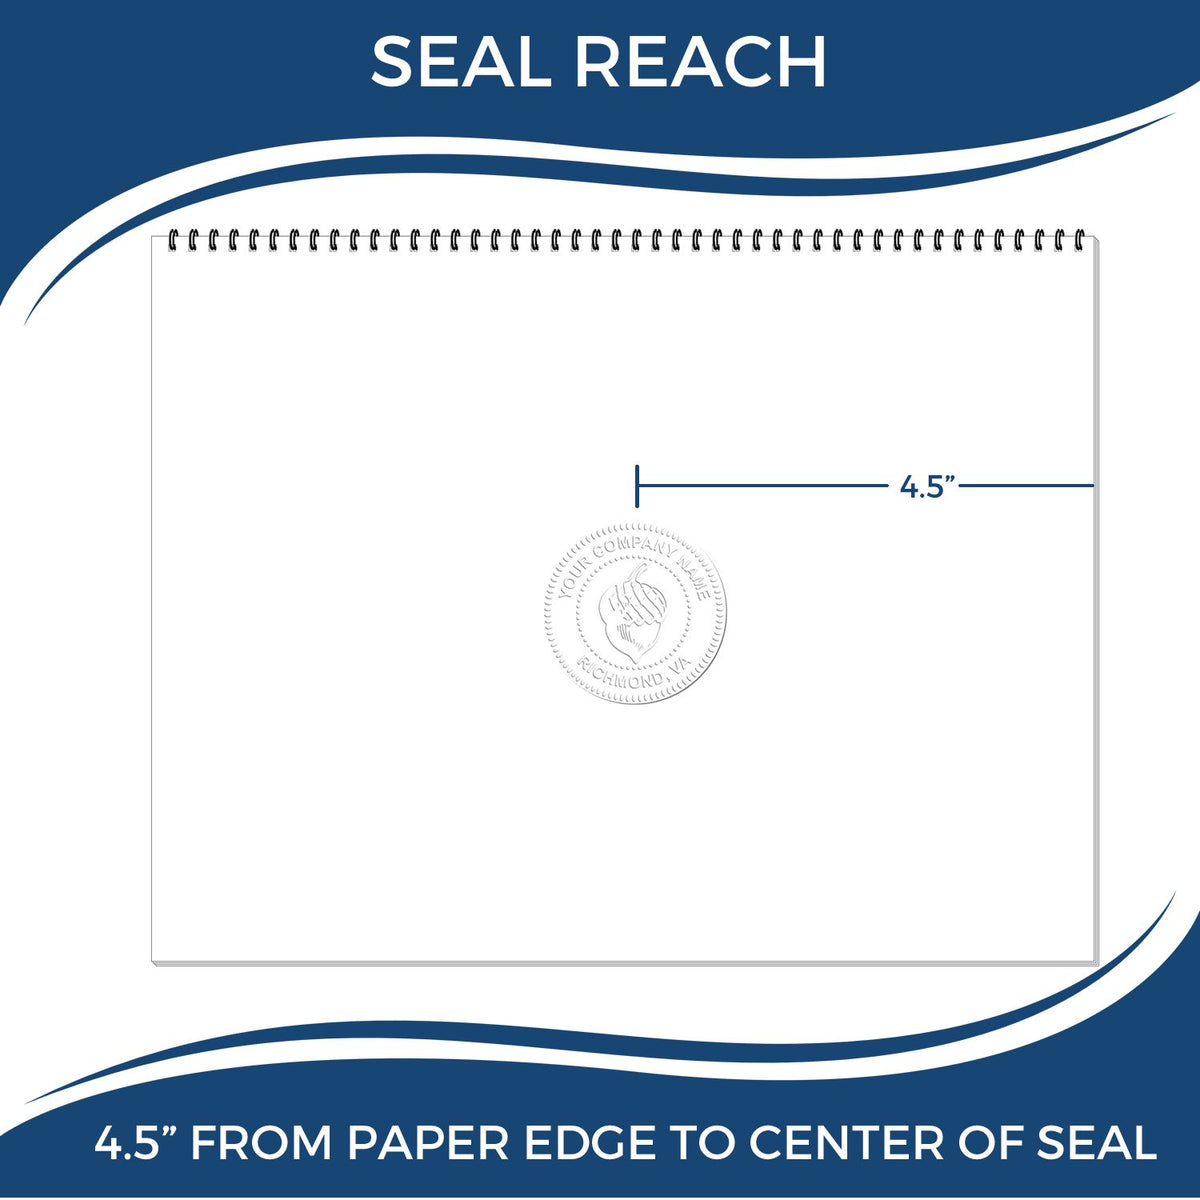 An infographic showing the seal reach which is represented by a ruler and a miniature seal image of the State of Georgia Extended Long Reach Geologist Seal